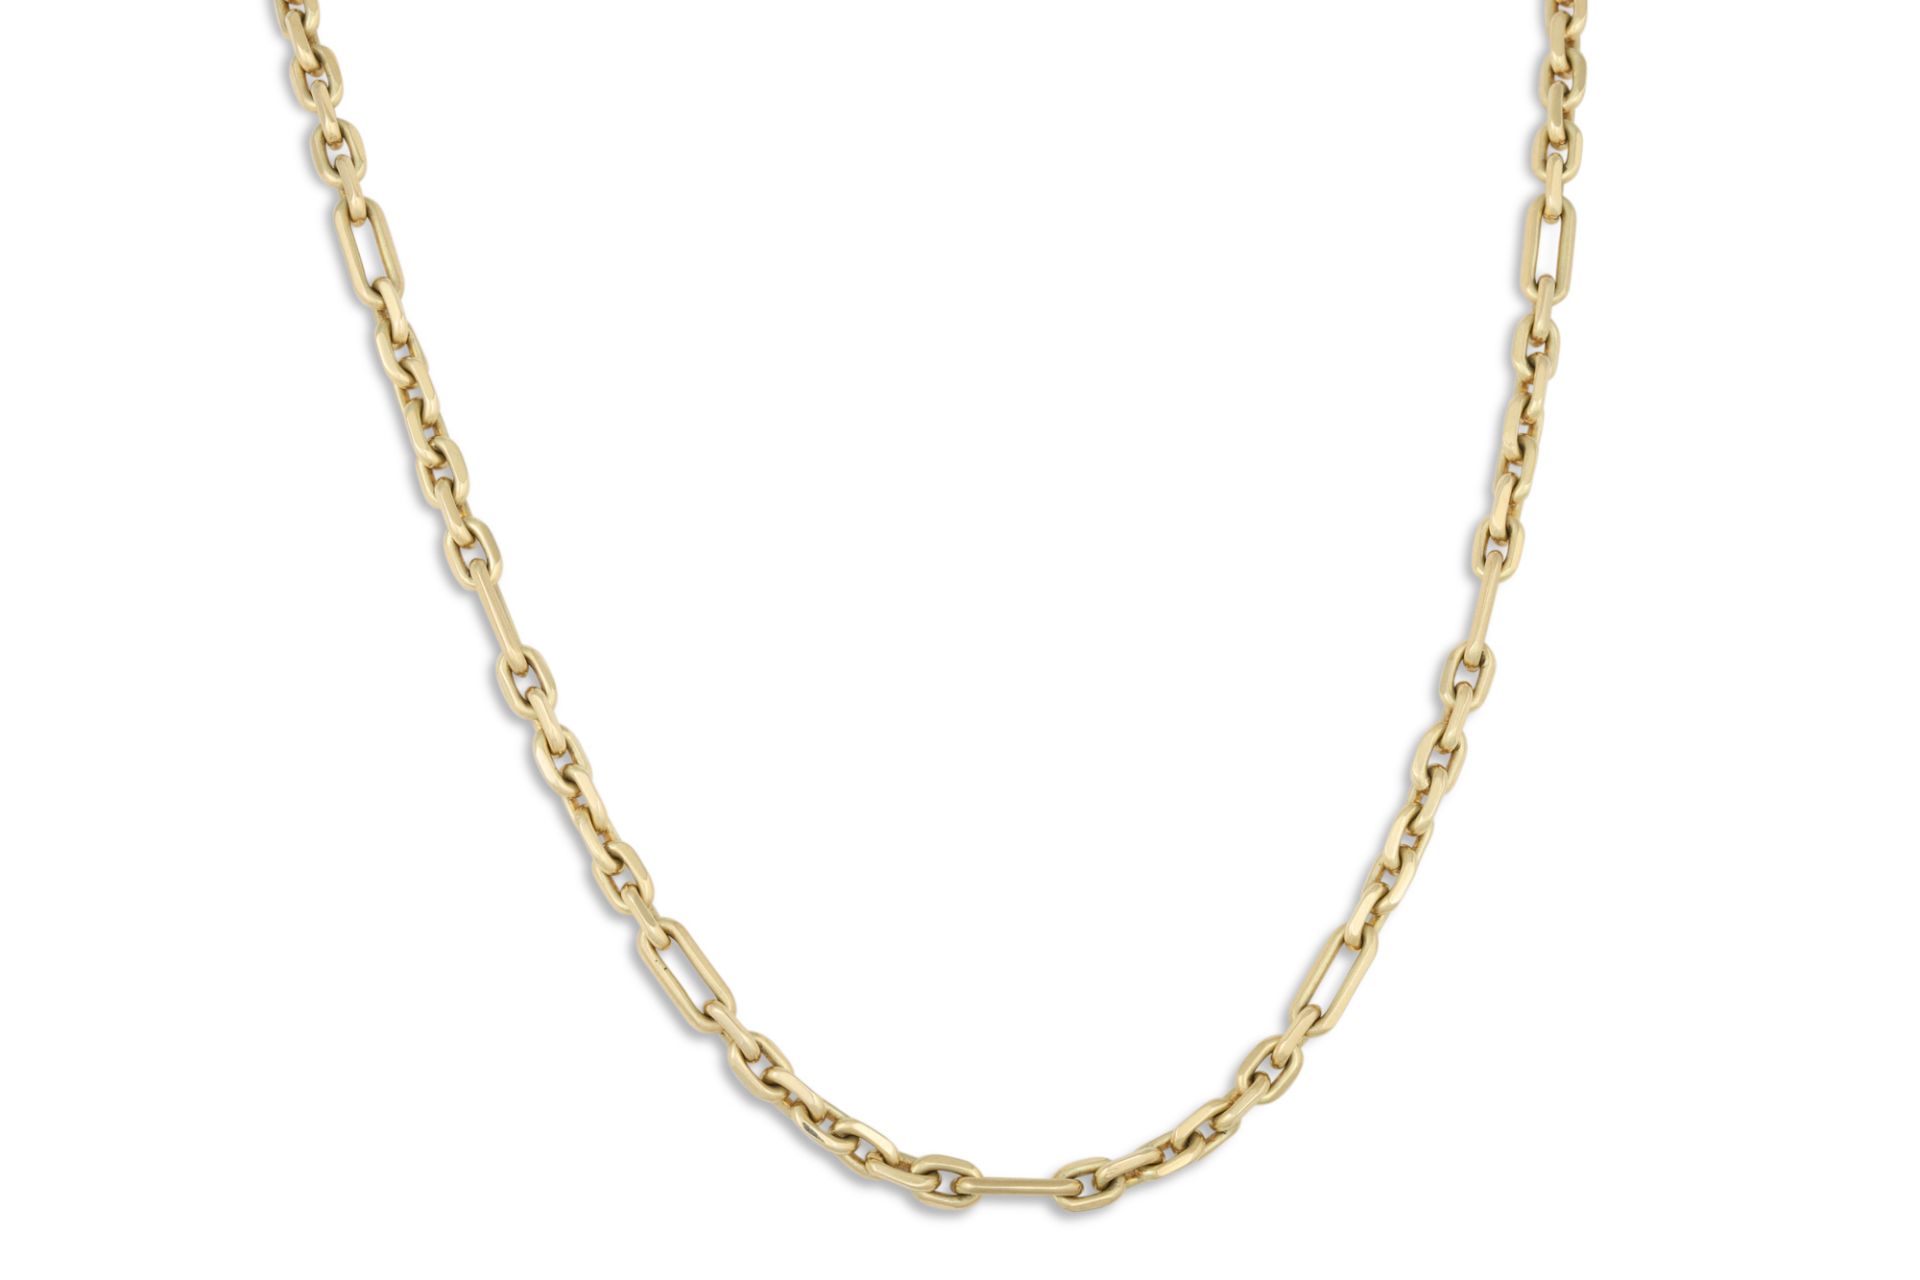 A HEAVY 14CT GOLD NECK CHAIN, 44.5 g.